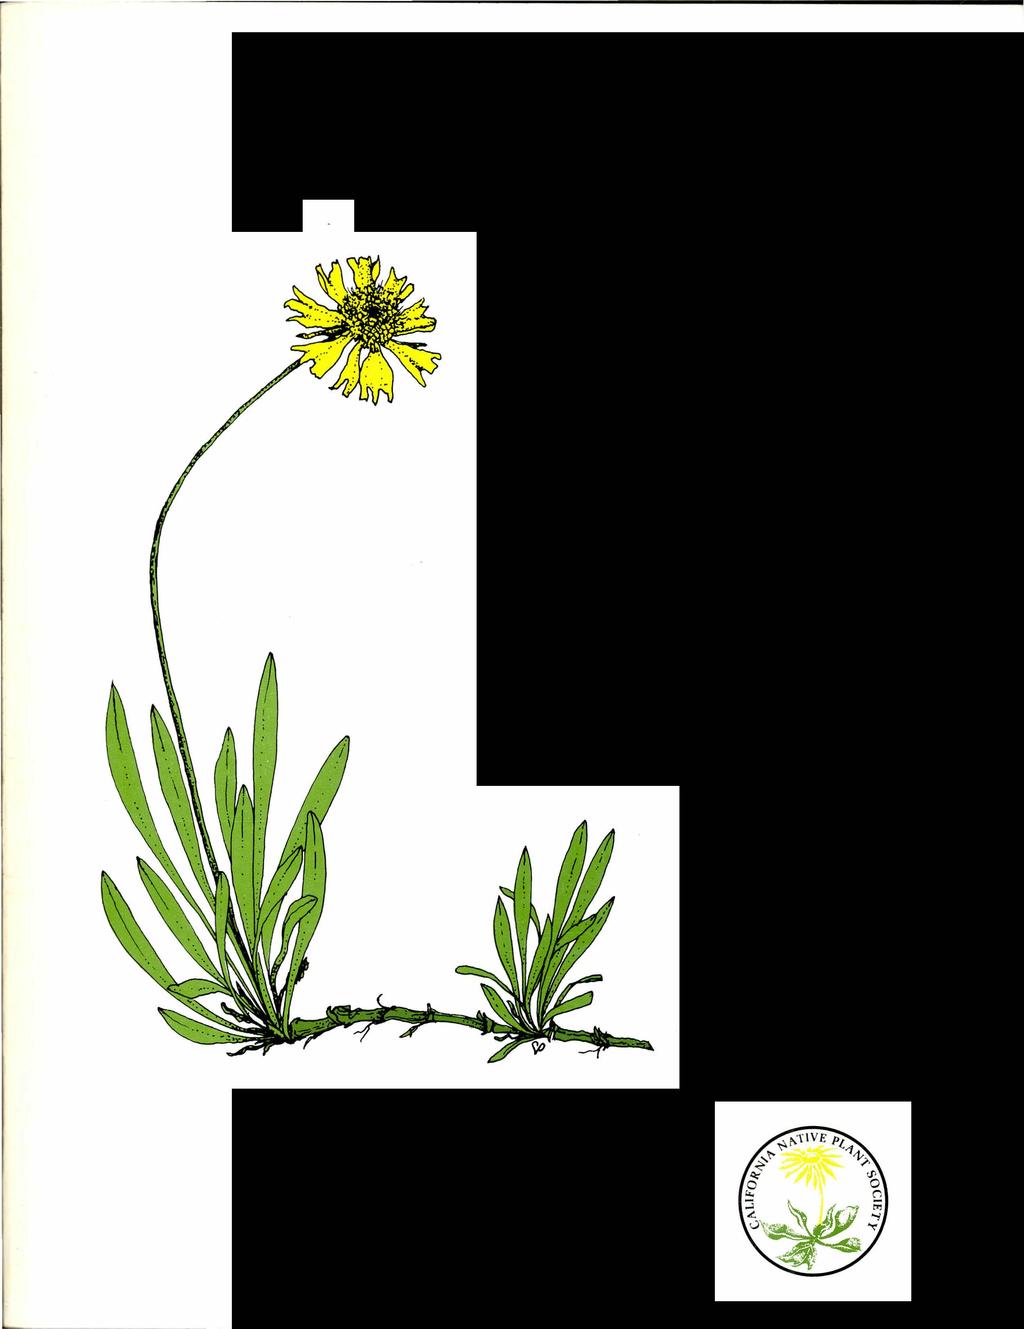 INVENTORY of RARE AND ENDANGERED VASCULAR PLANTS of CALIFORNIA, Special